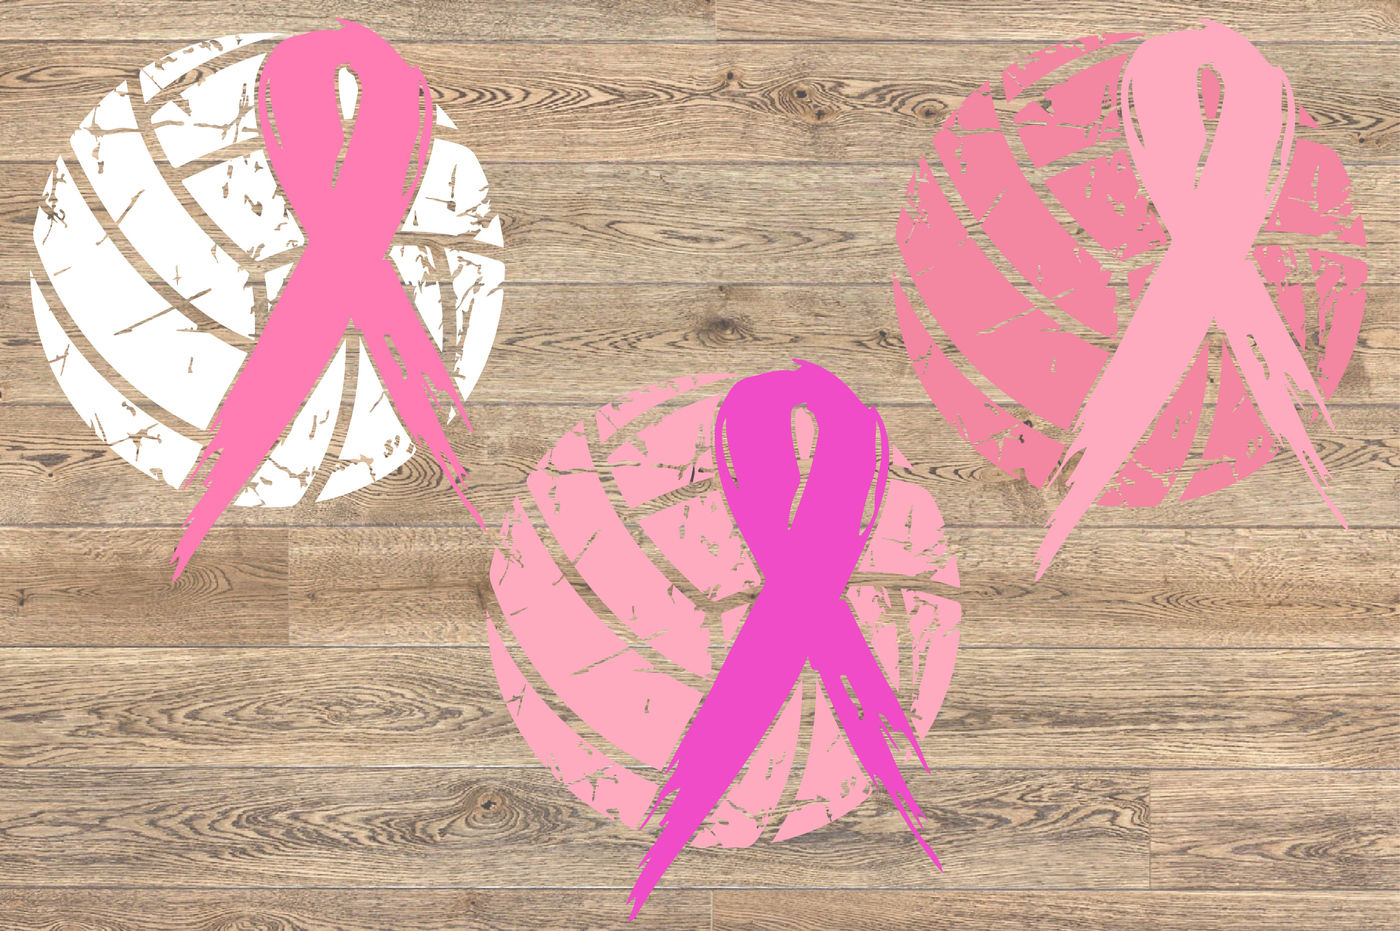 LHS Volleyball and DECA raise more than $2400 for Breast Cancer Awareness  Month